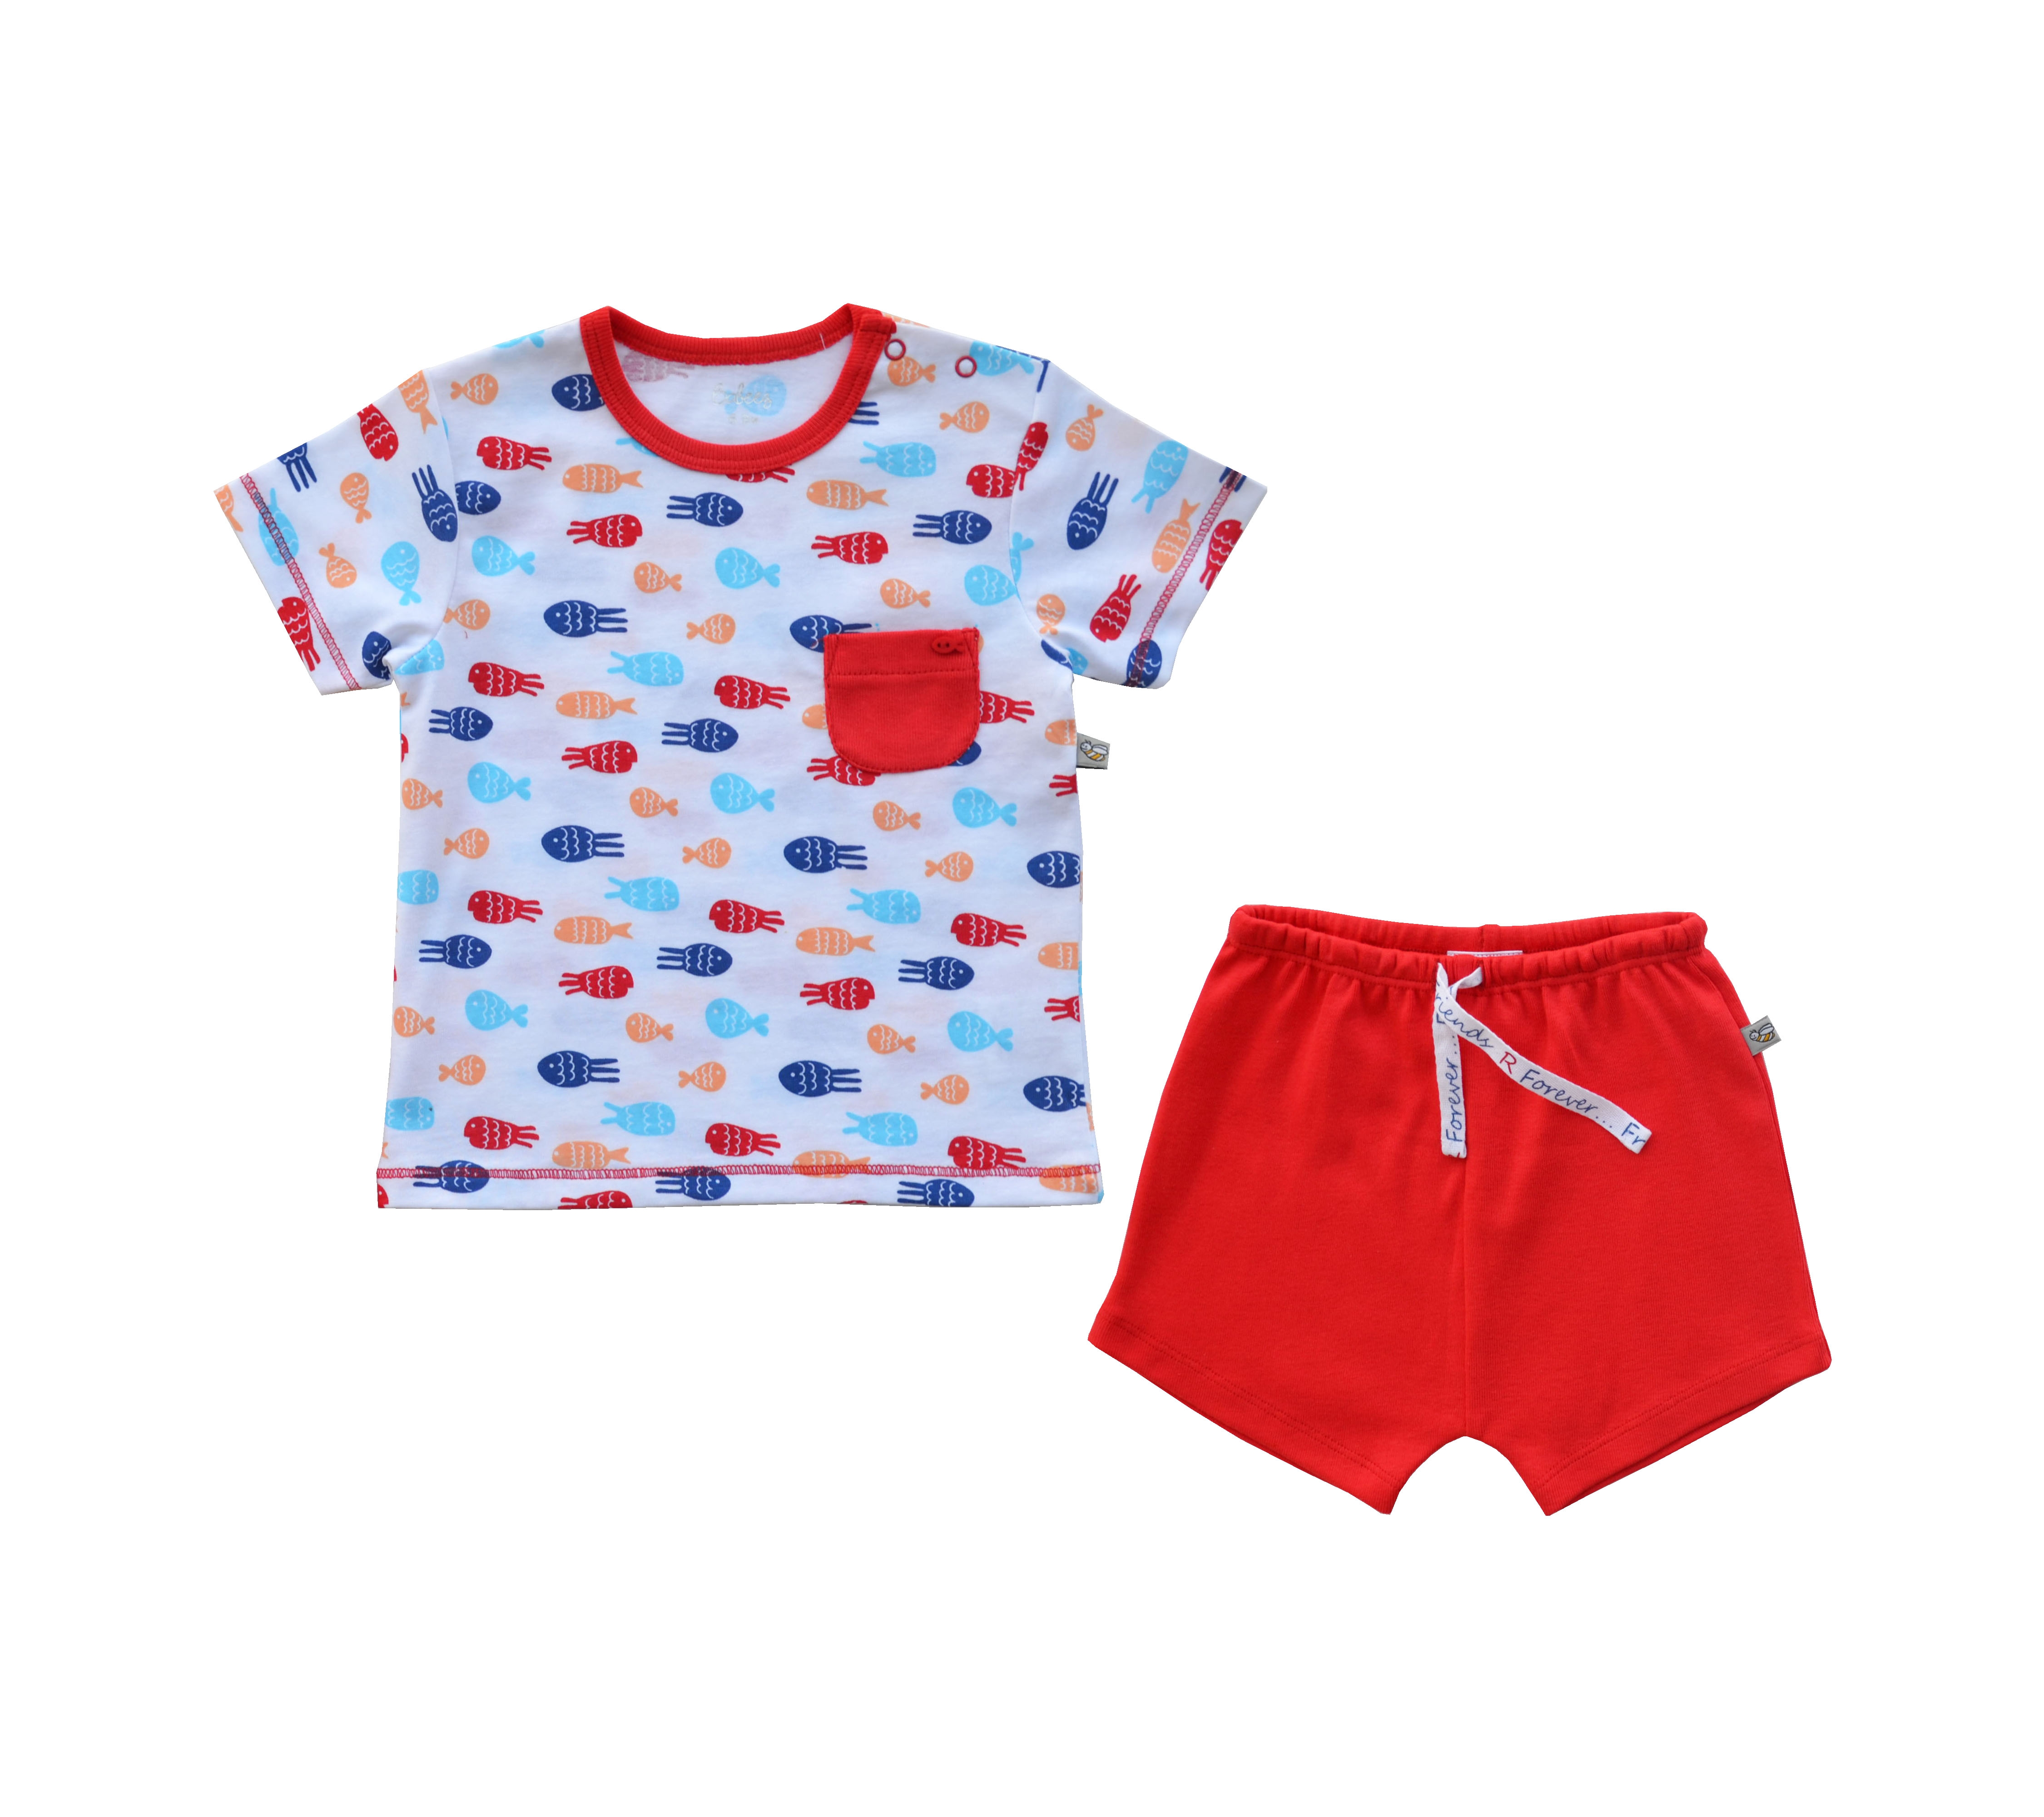 Babeez | White Fish Allover Print T-Shirt + Red Shorty Set (100% Cotton Jersey) undefined